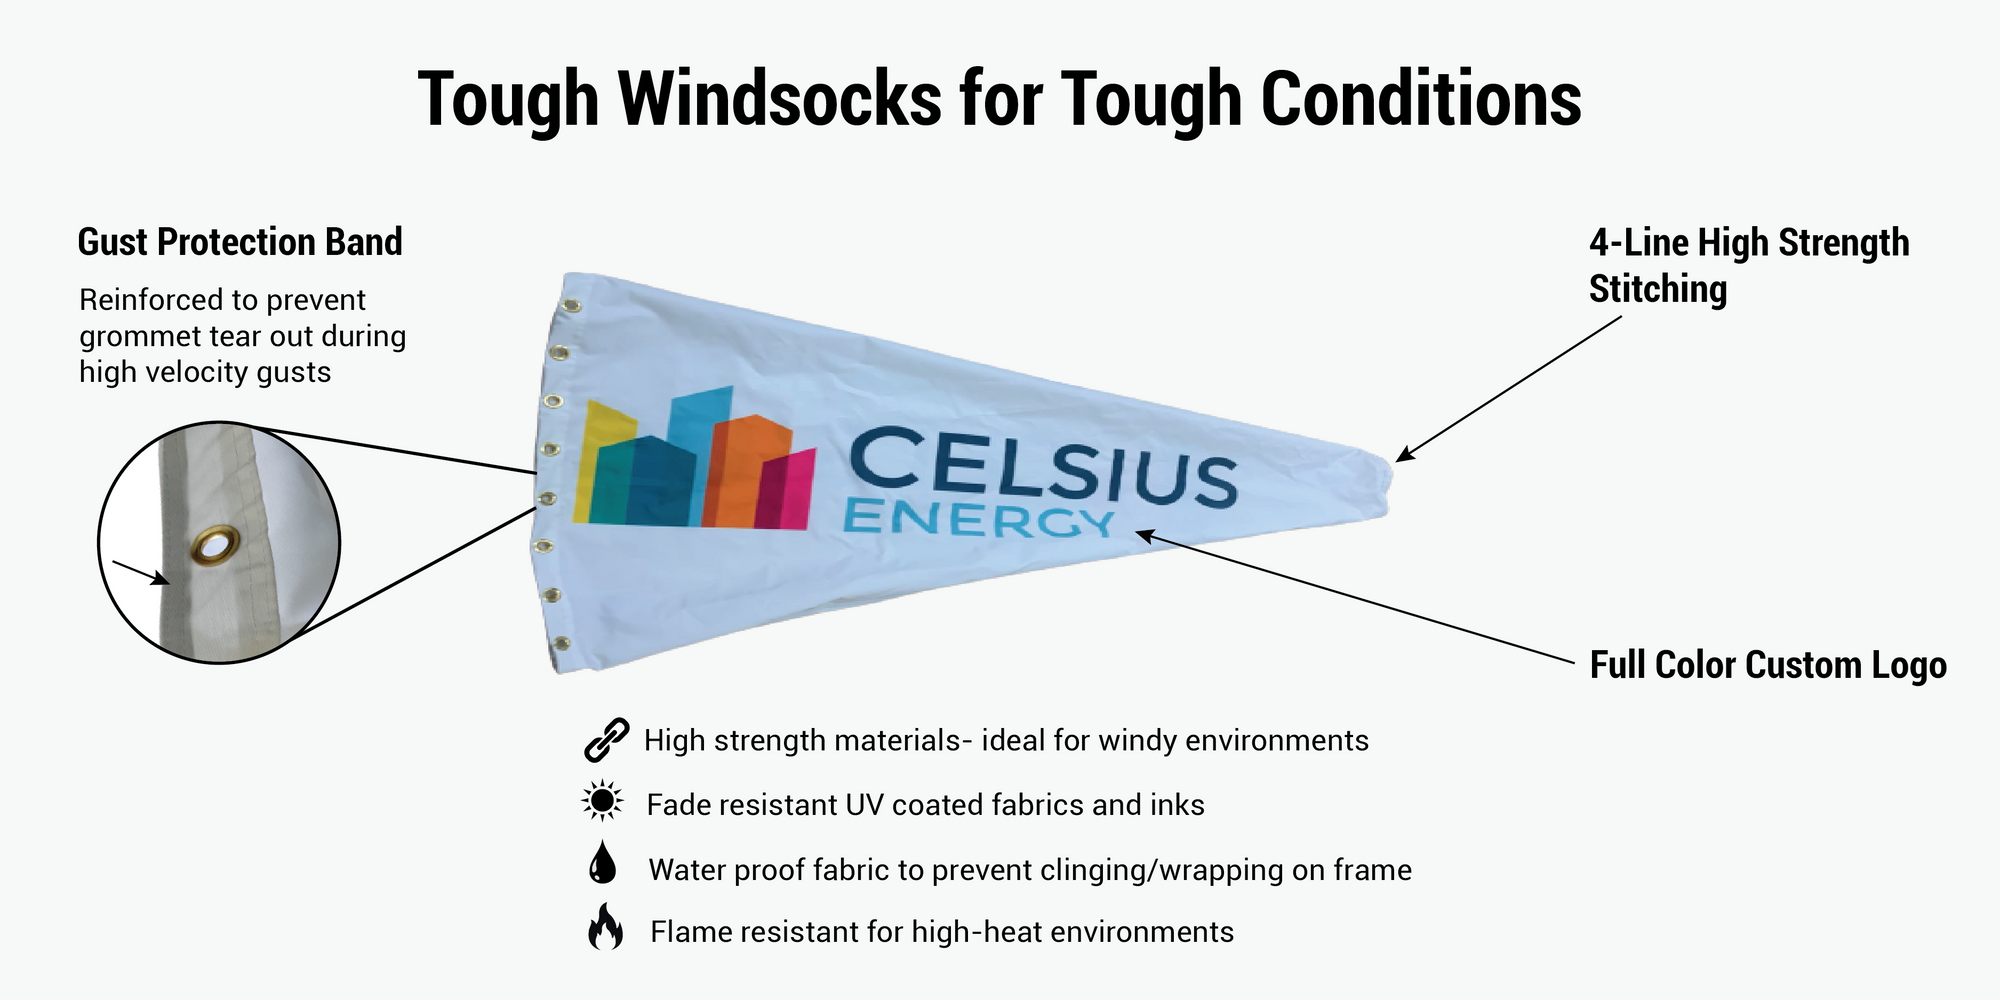 Custom printed windsocks for oil and gas infographic. fire retardant. water proof, hi visibility, fluorescent windsocks for refineries, heli pads offshore rigs